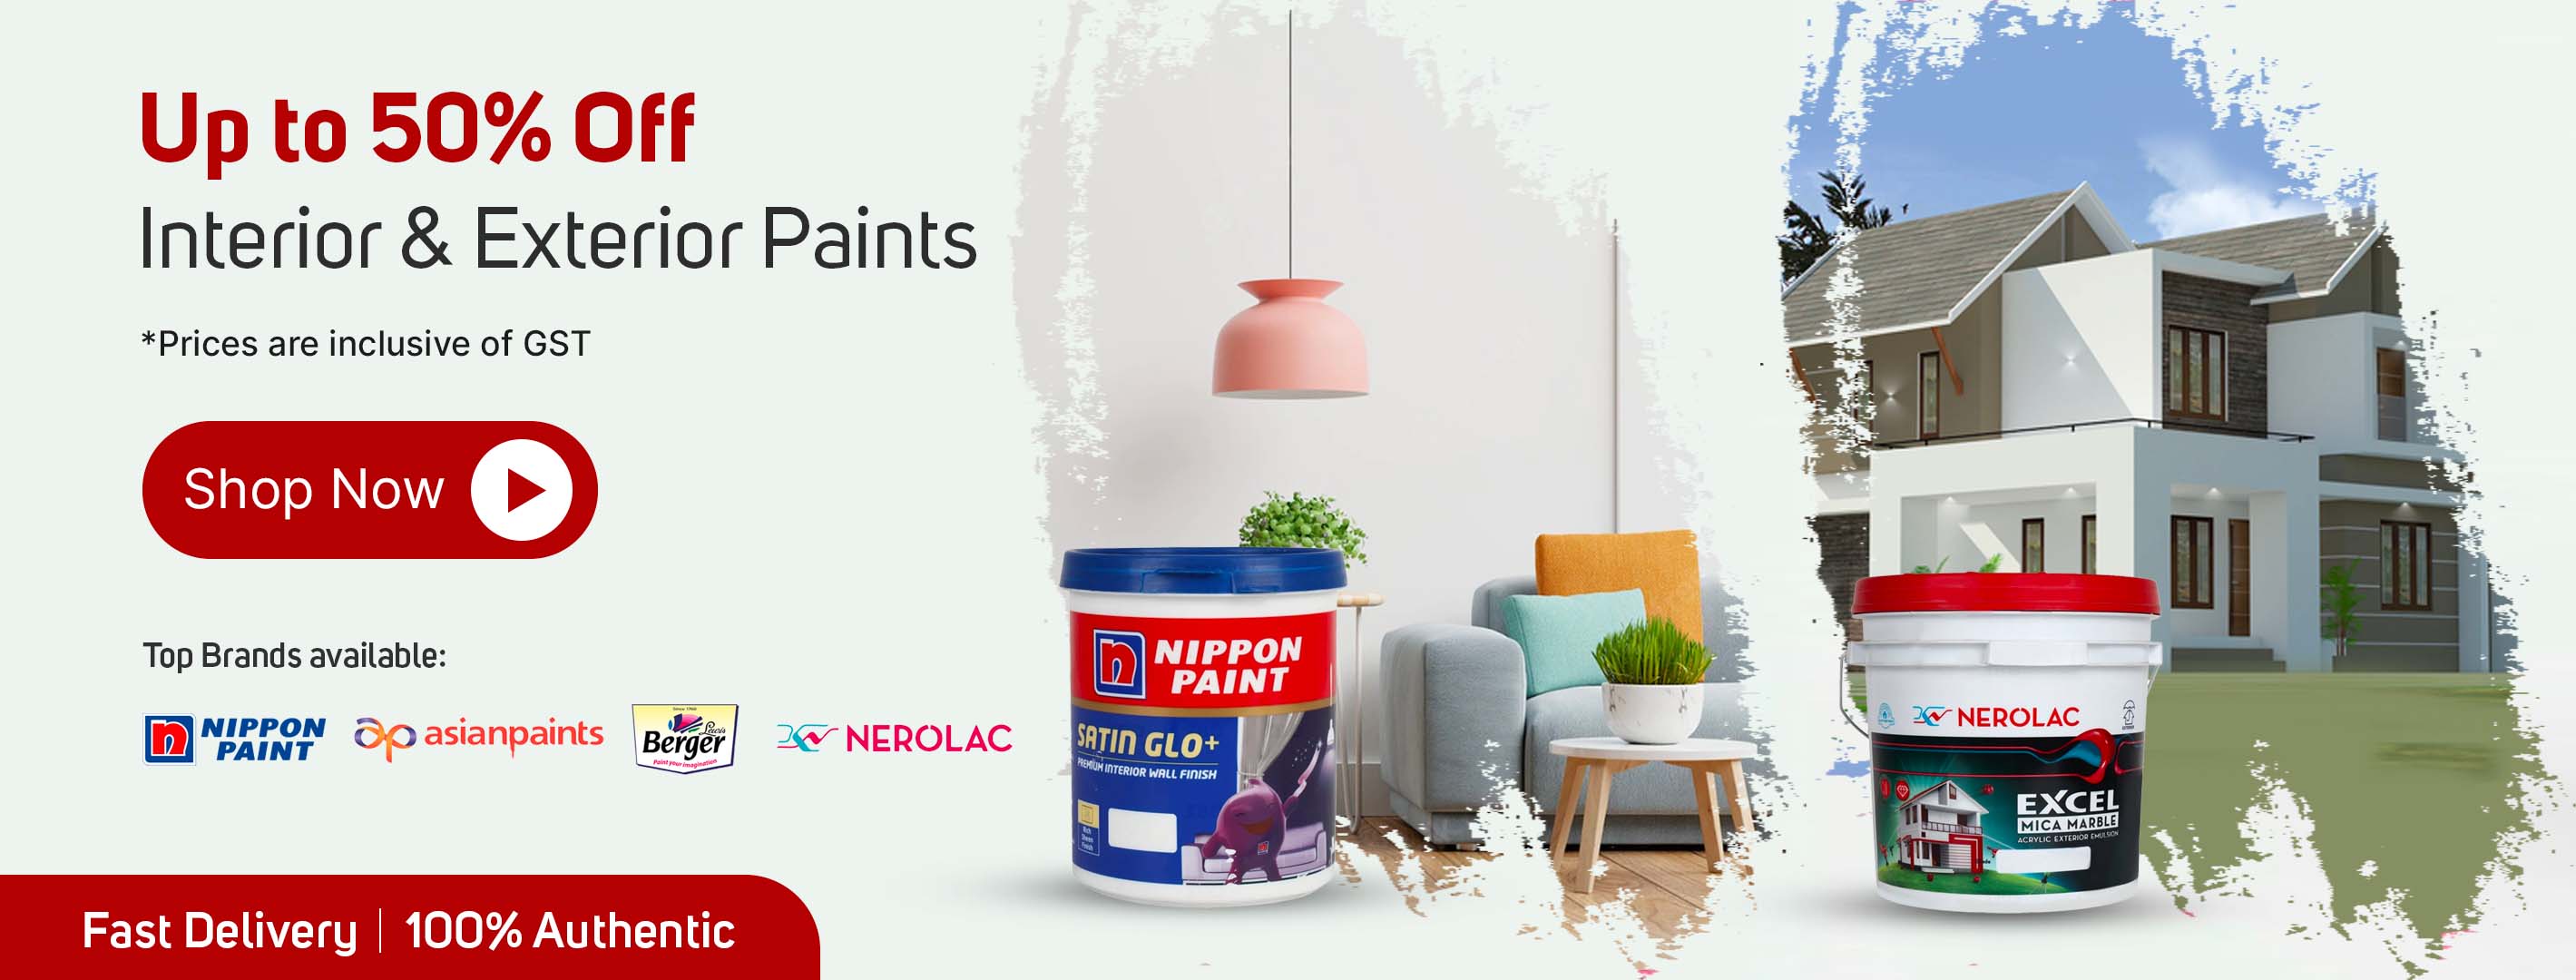 Interior and Exterior Paints